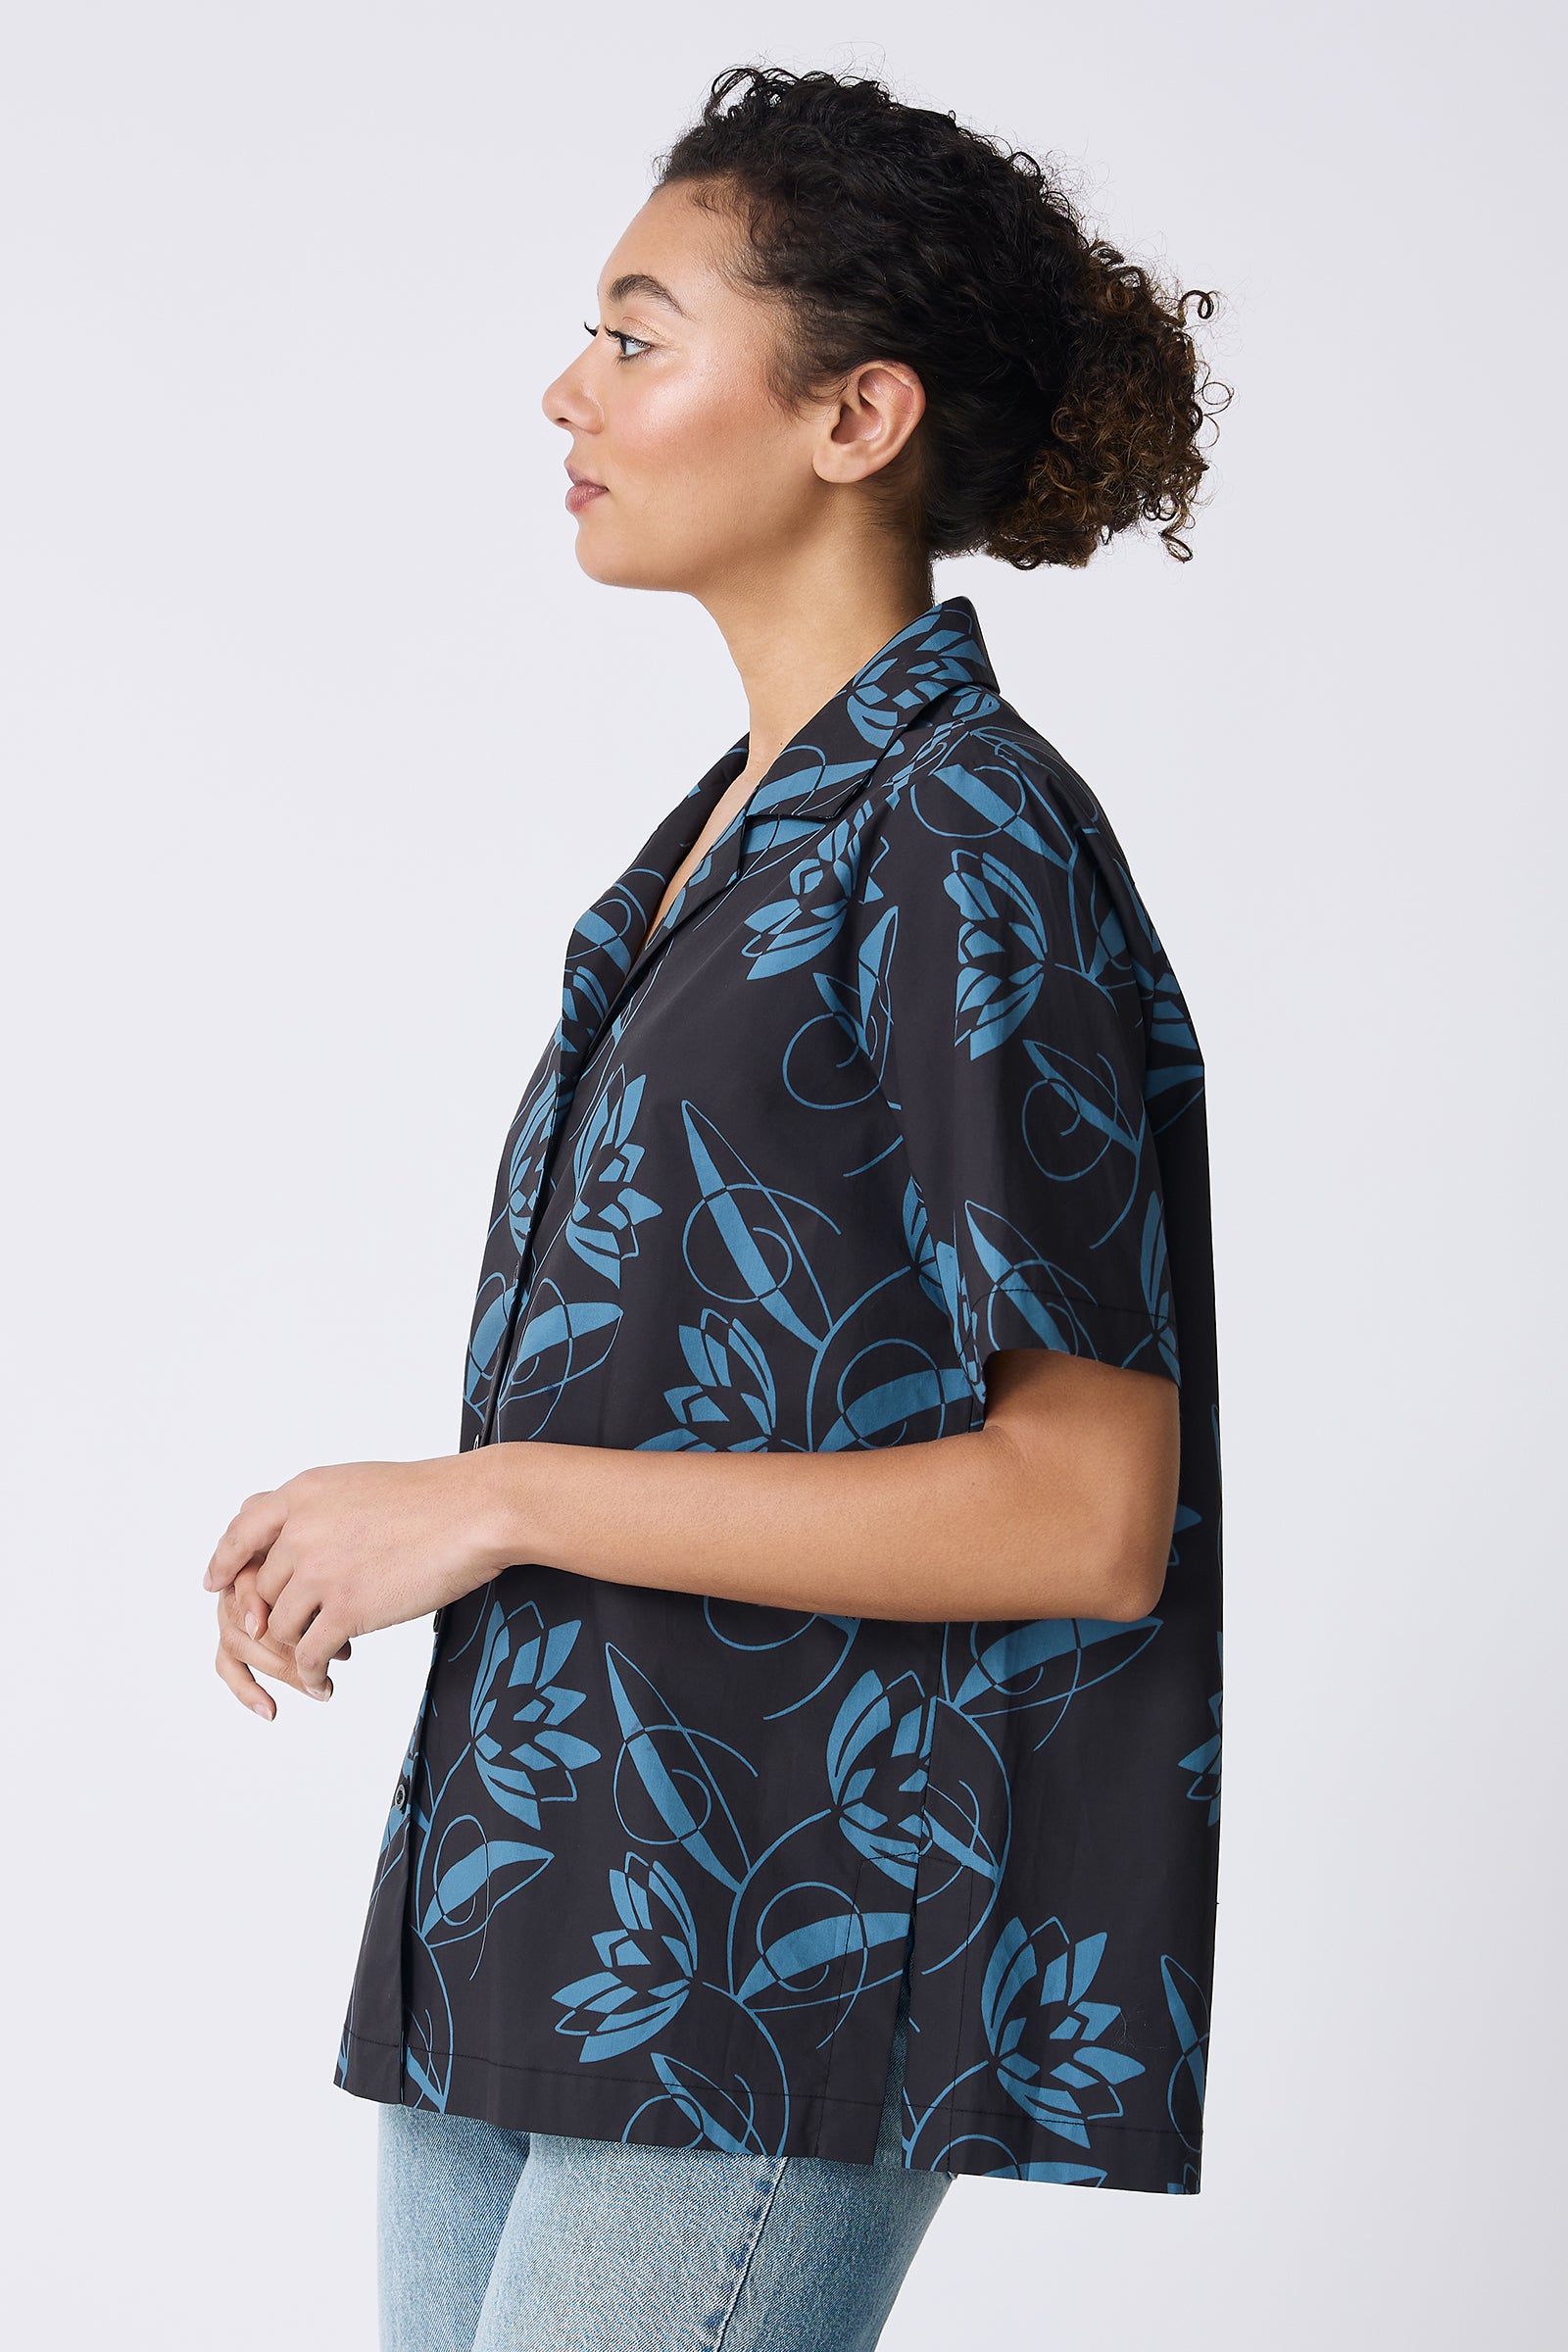 Kal Rieman Vacation Shirt in Lotus Print Blue on model side view